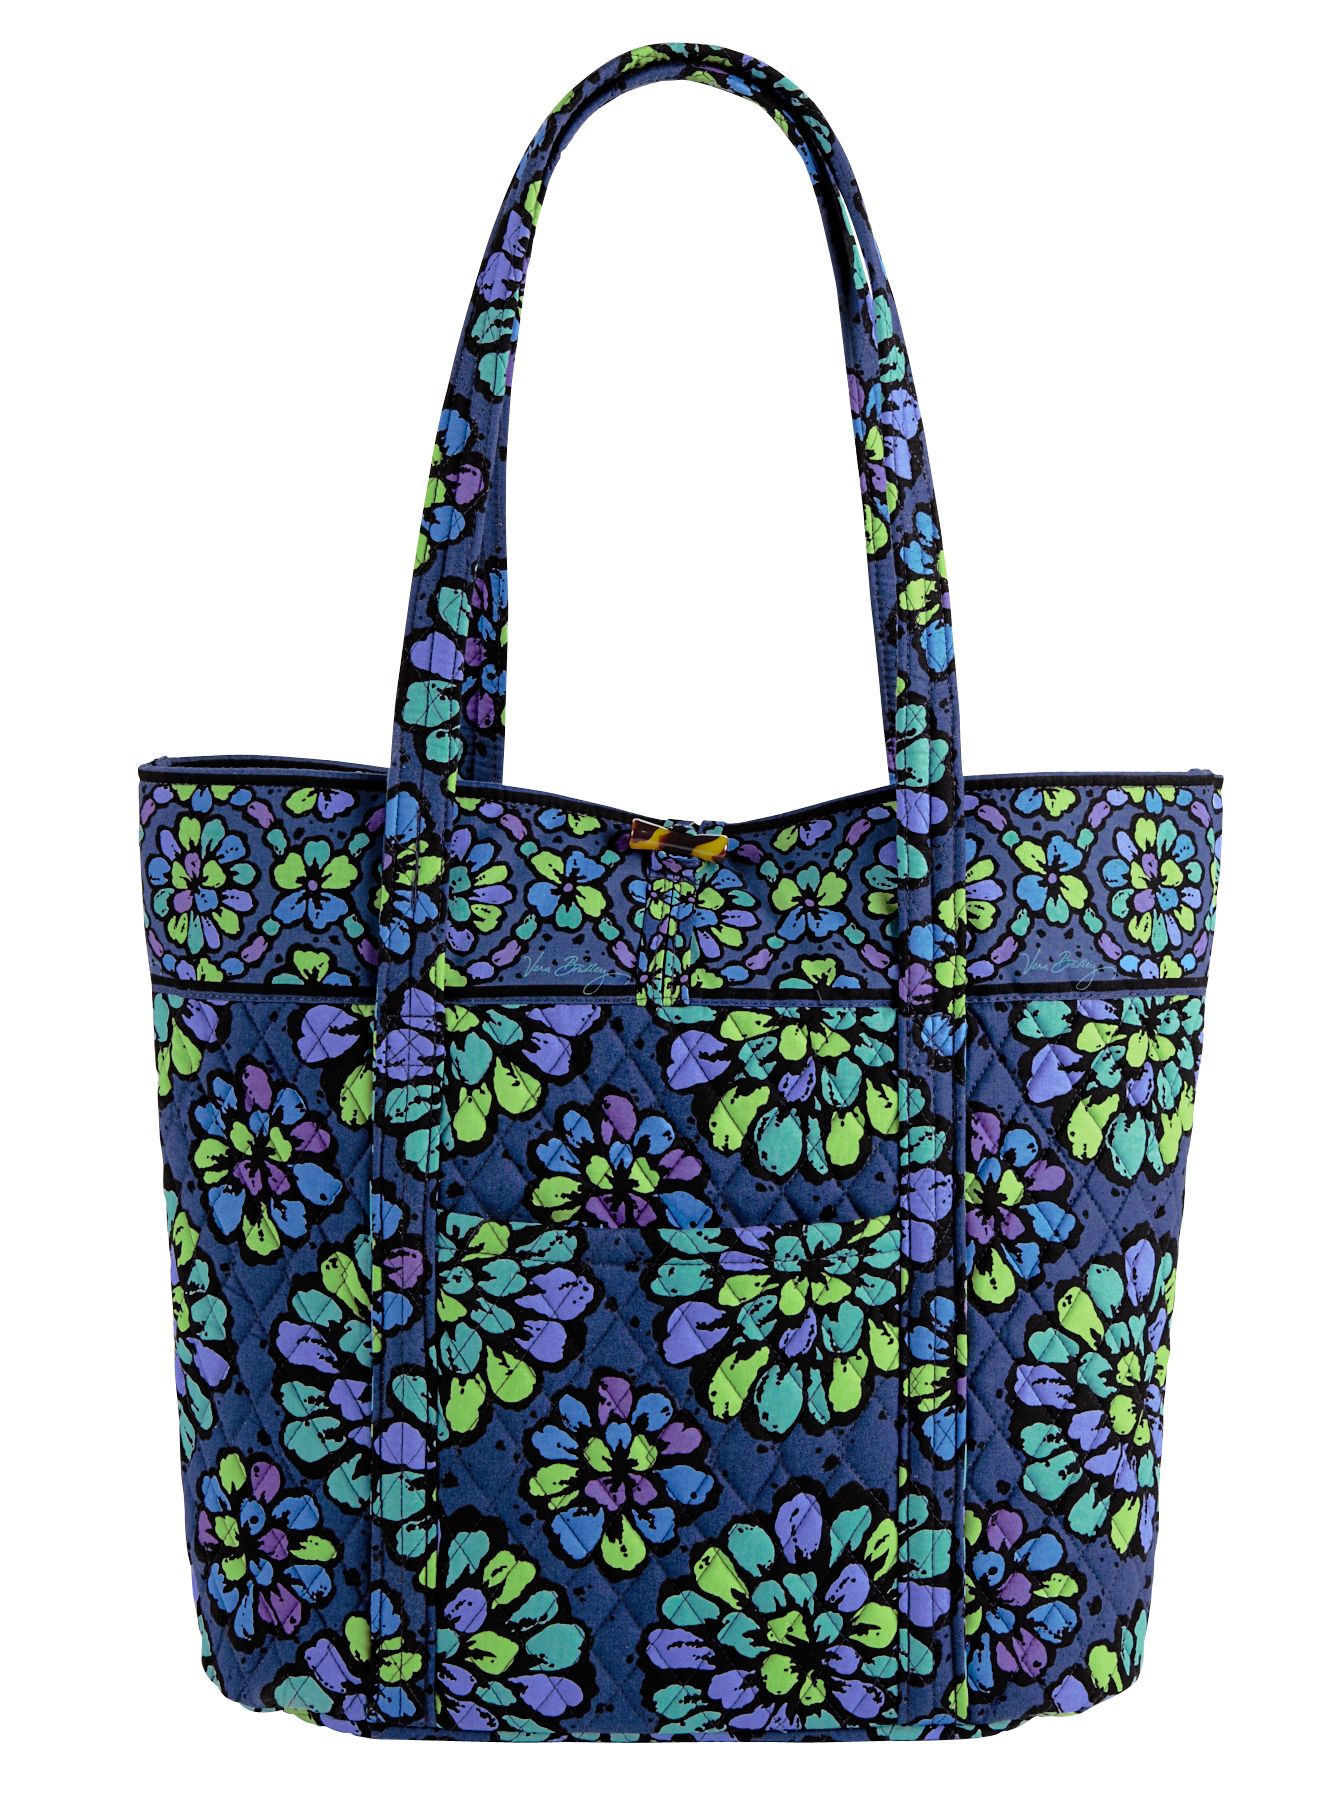 Vera Bradley Clearance Sale, Up To 60% off!